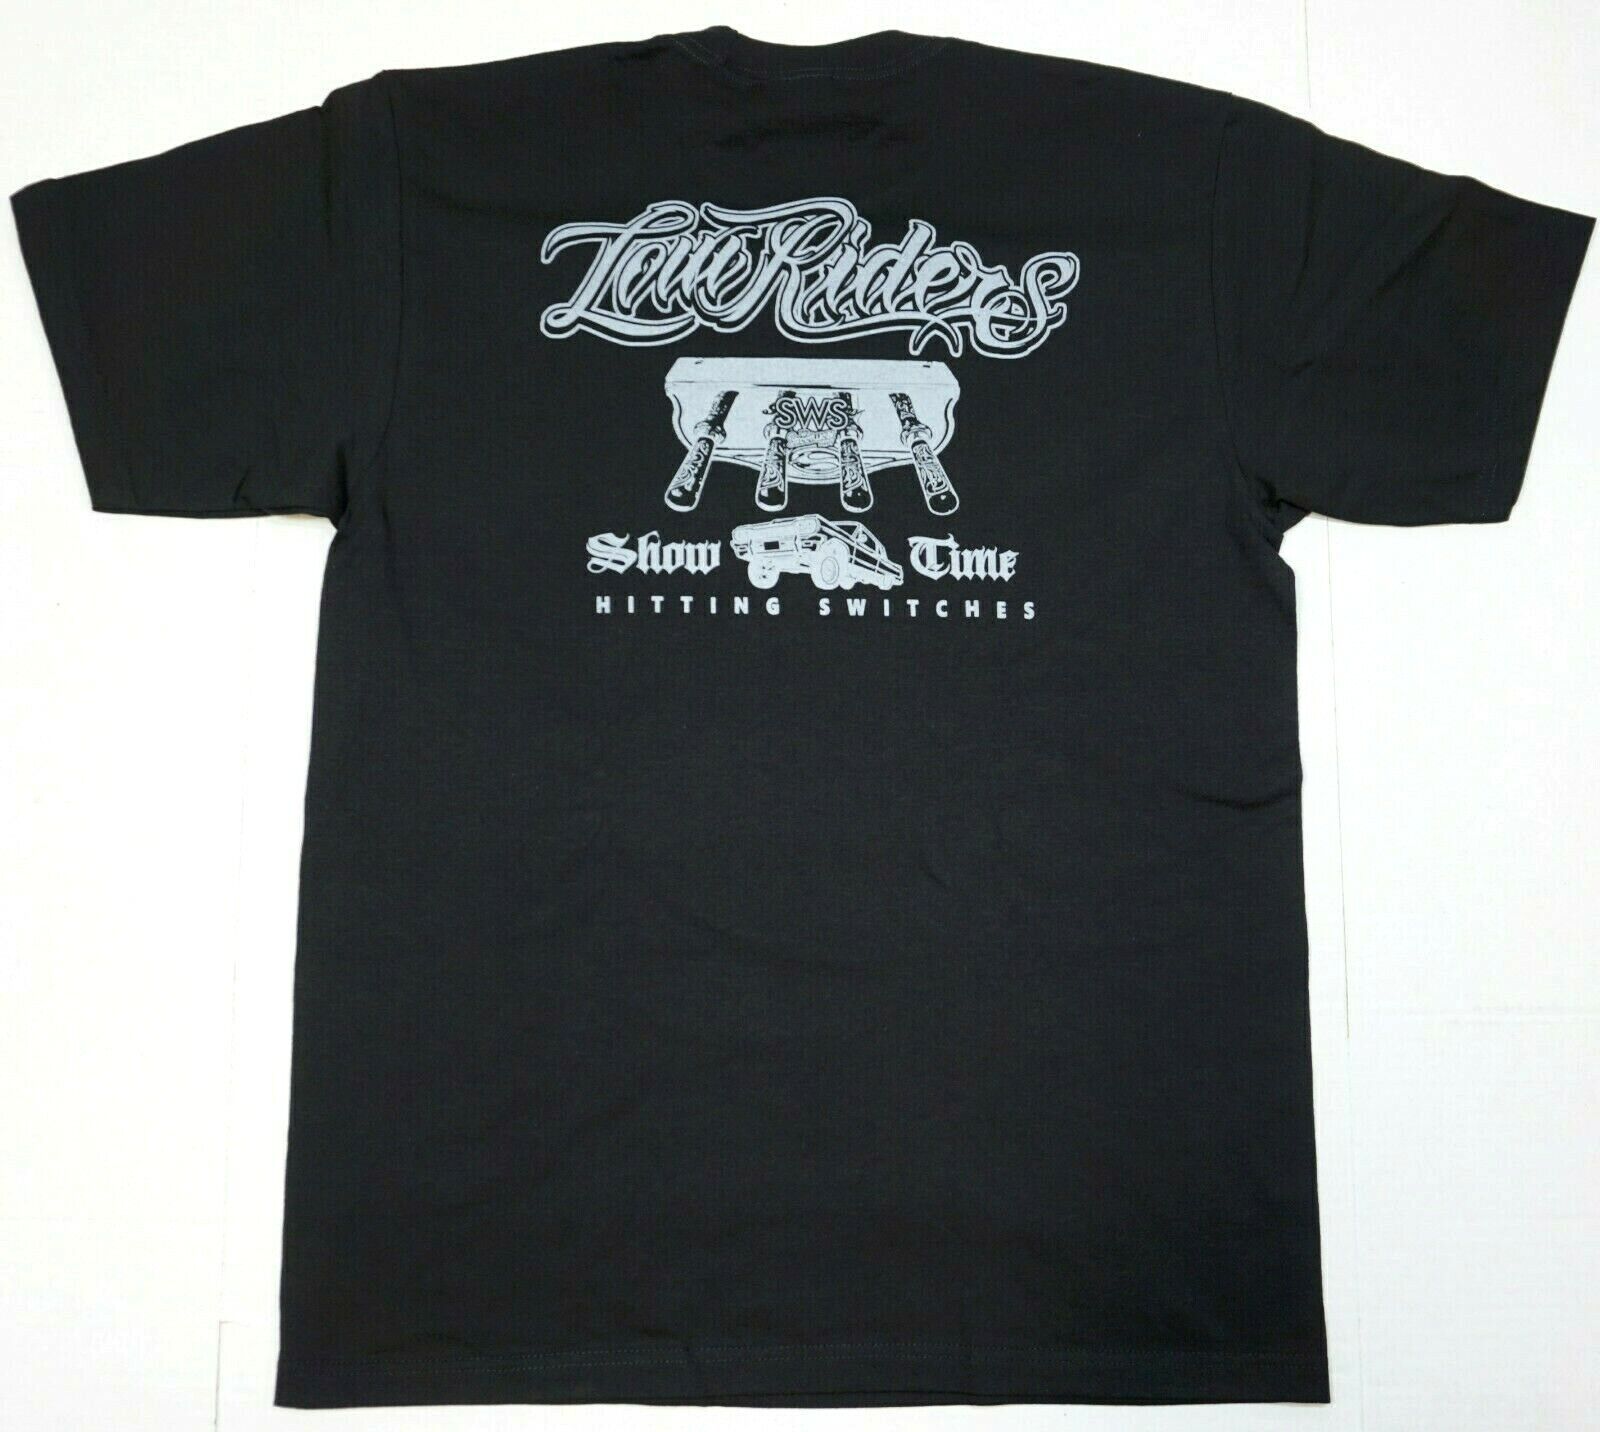 Lowrider Clothing / Show Time / Chicano Streetwear - superlowriders.com